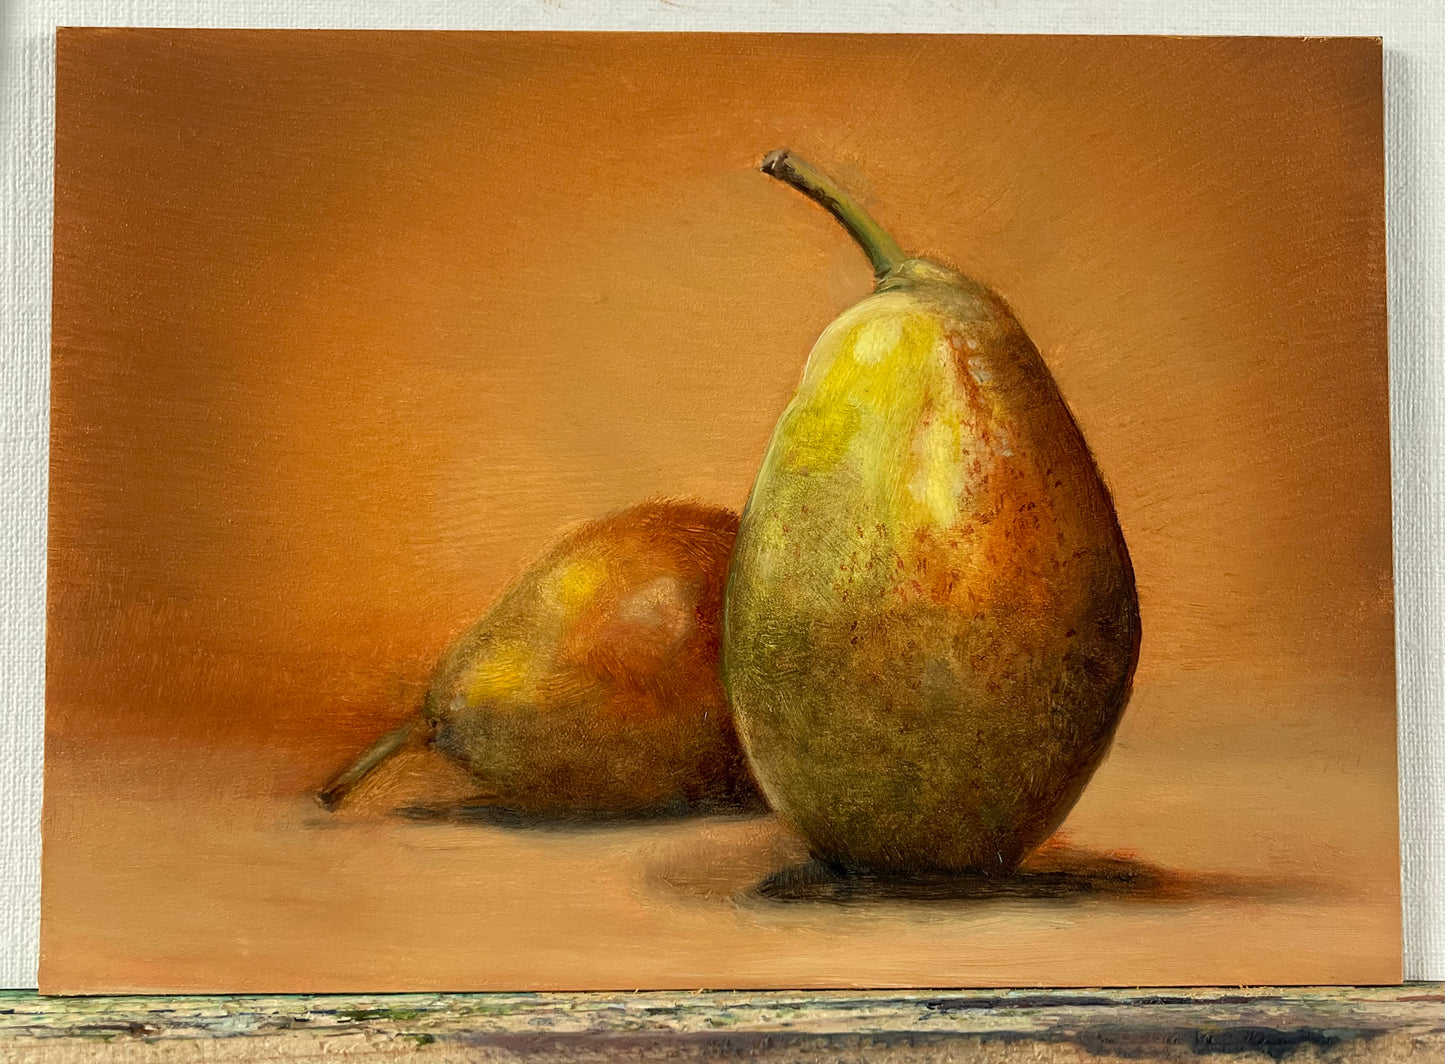 Pair of Pears Still Life | Original Oil Painting | 5 x 7 inches with optional frame